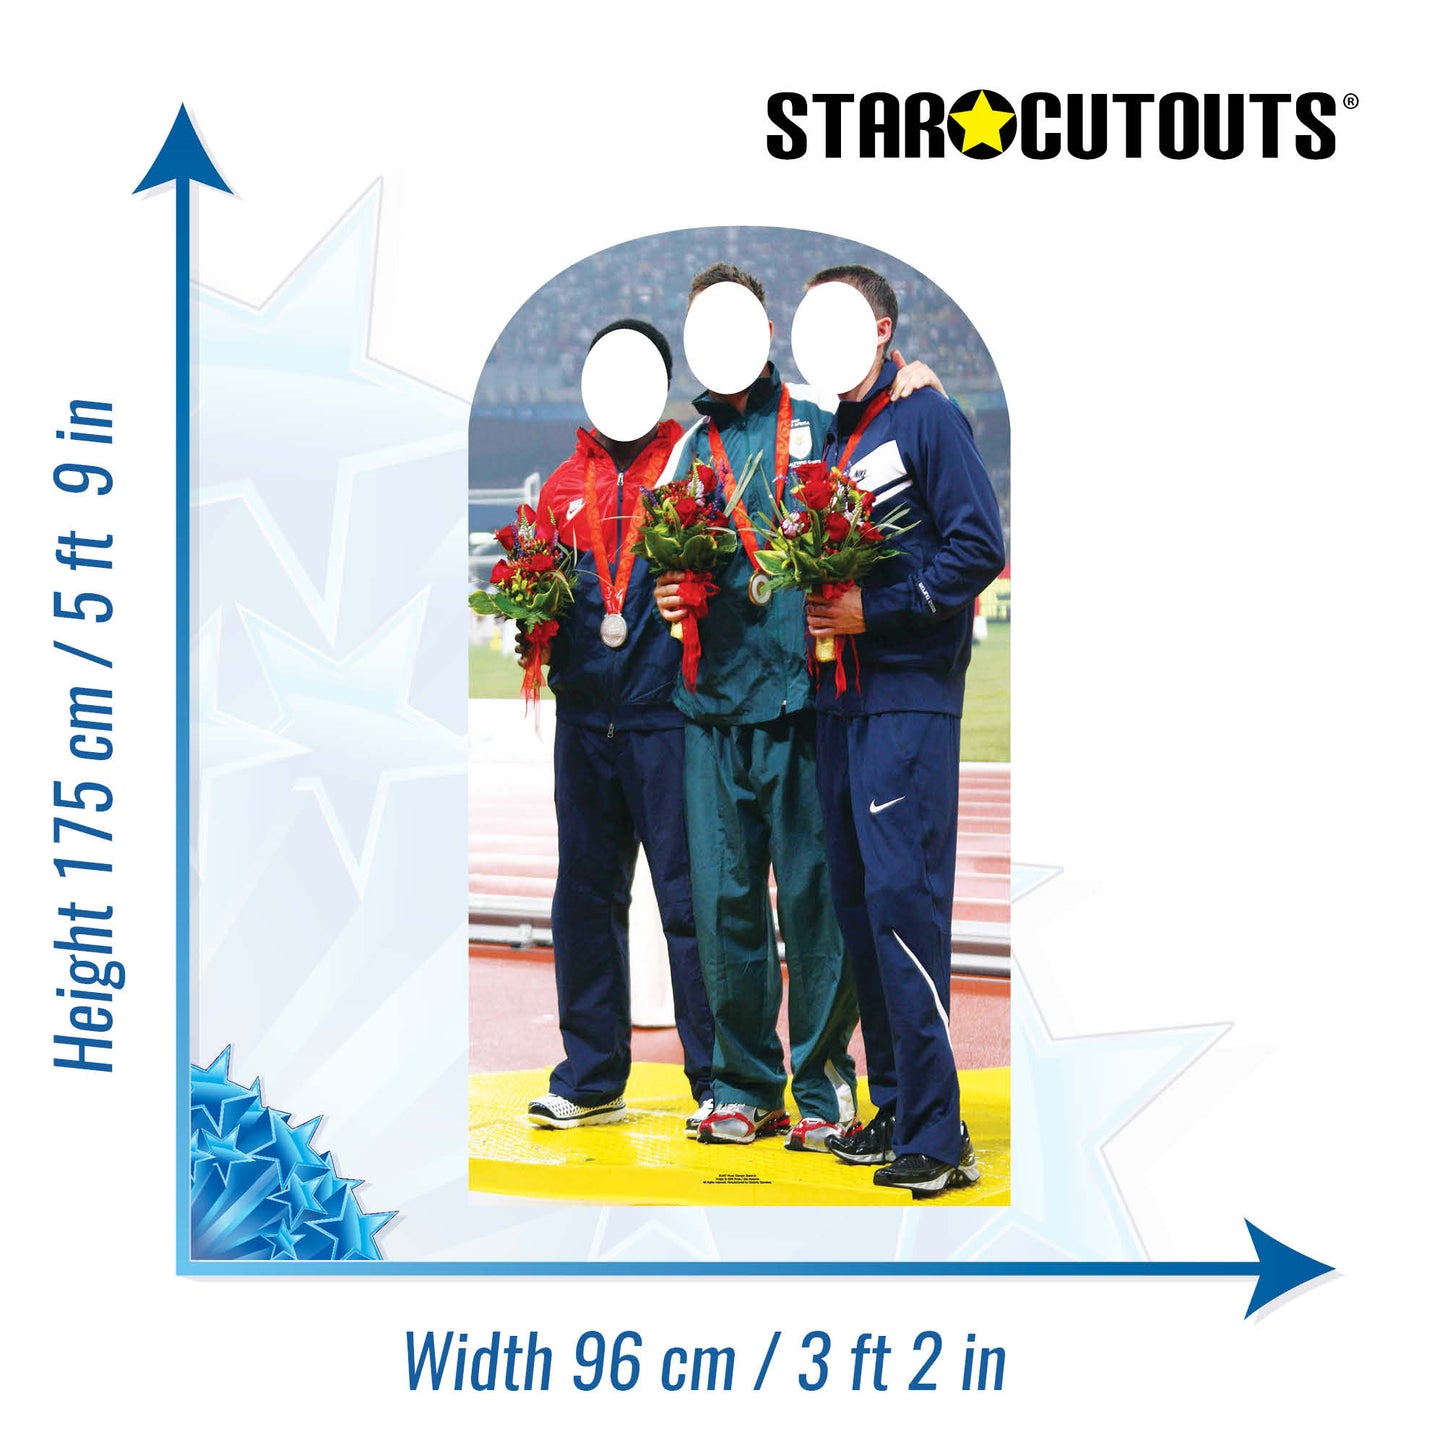 Olympic Photo Stand-In Cardboard Cutout